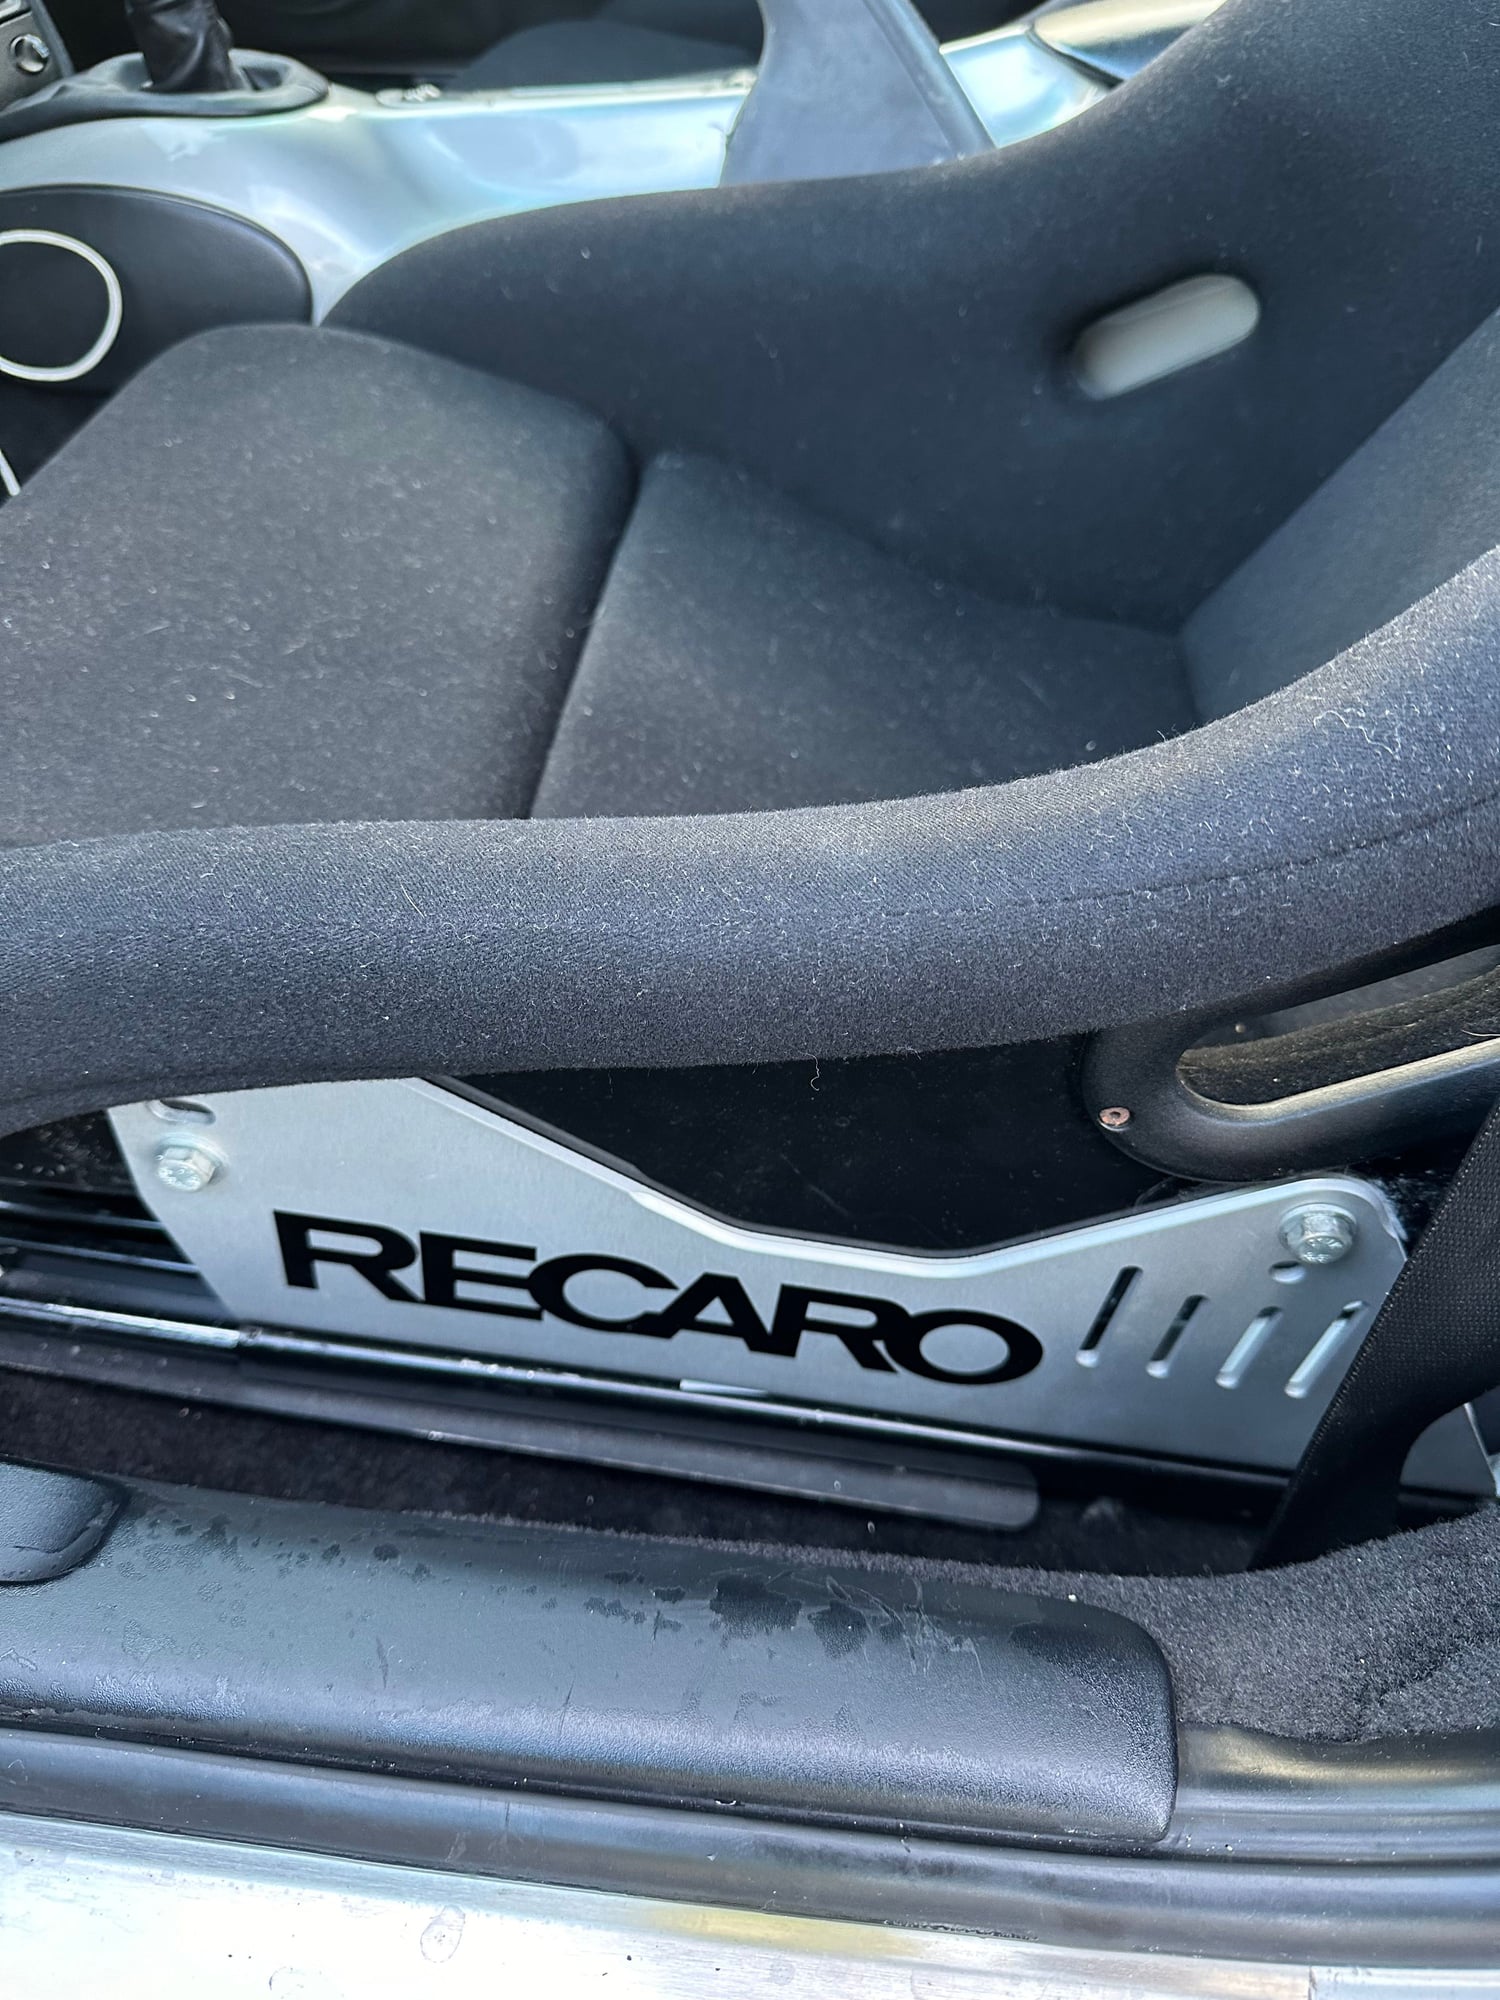 Interior/Upholstery - Trade: Recaro Pole Positions for Stock 996 Seats - Used - -1 to 2025  All Models - -1 to 2025  All Models - Richmond, VA 23220, United States